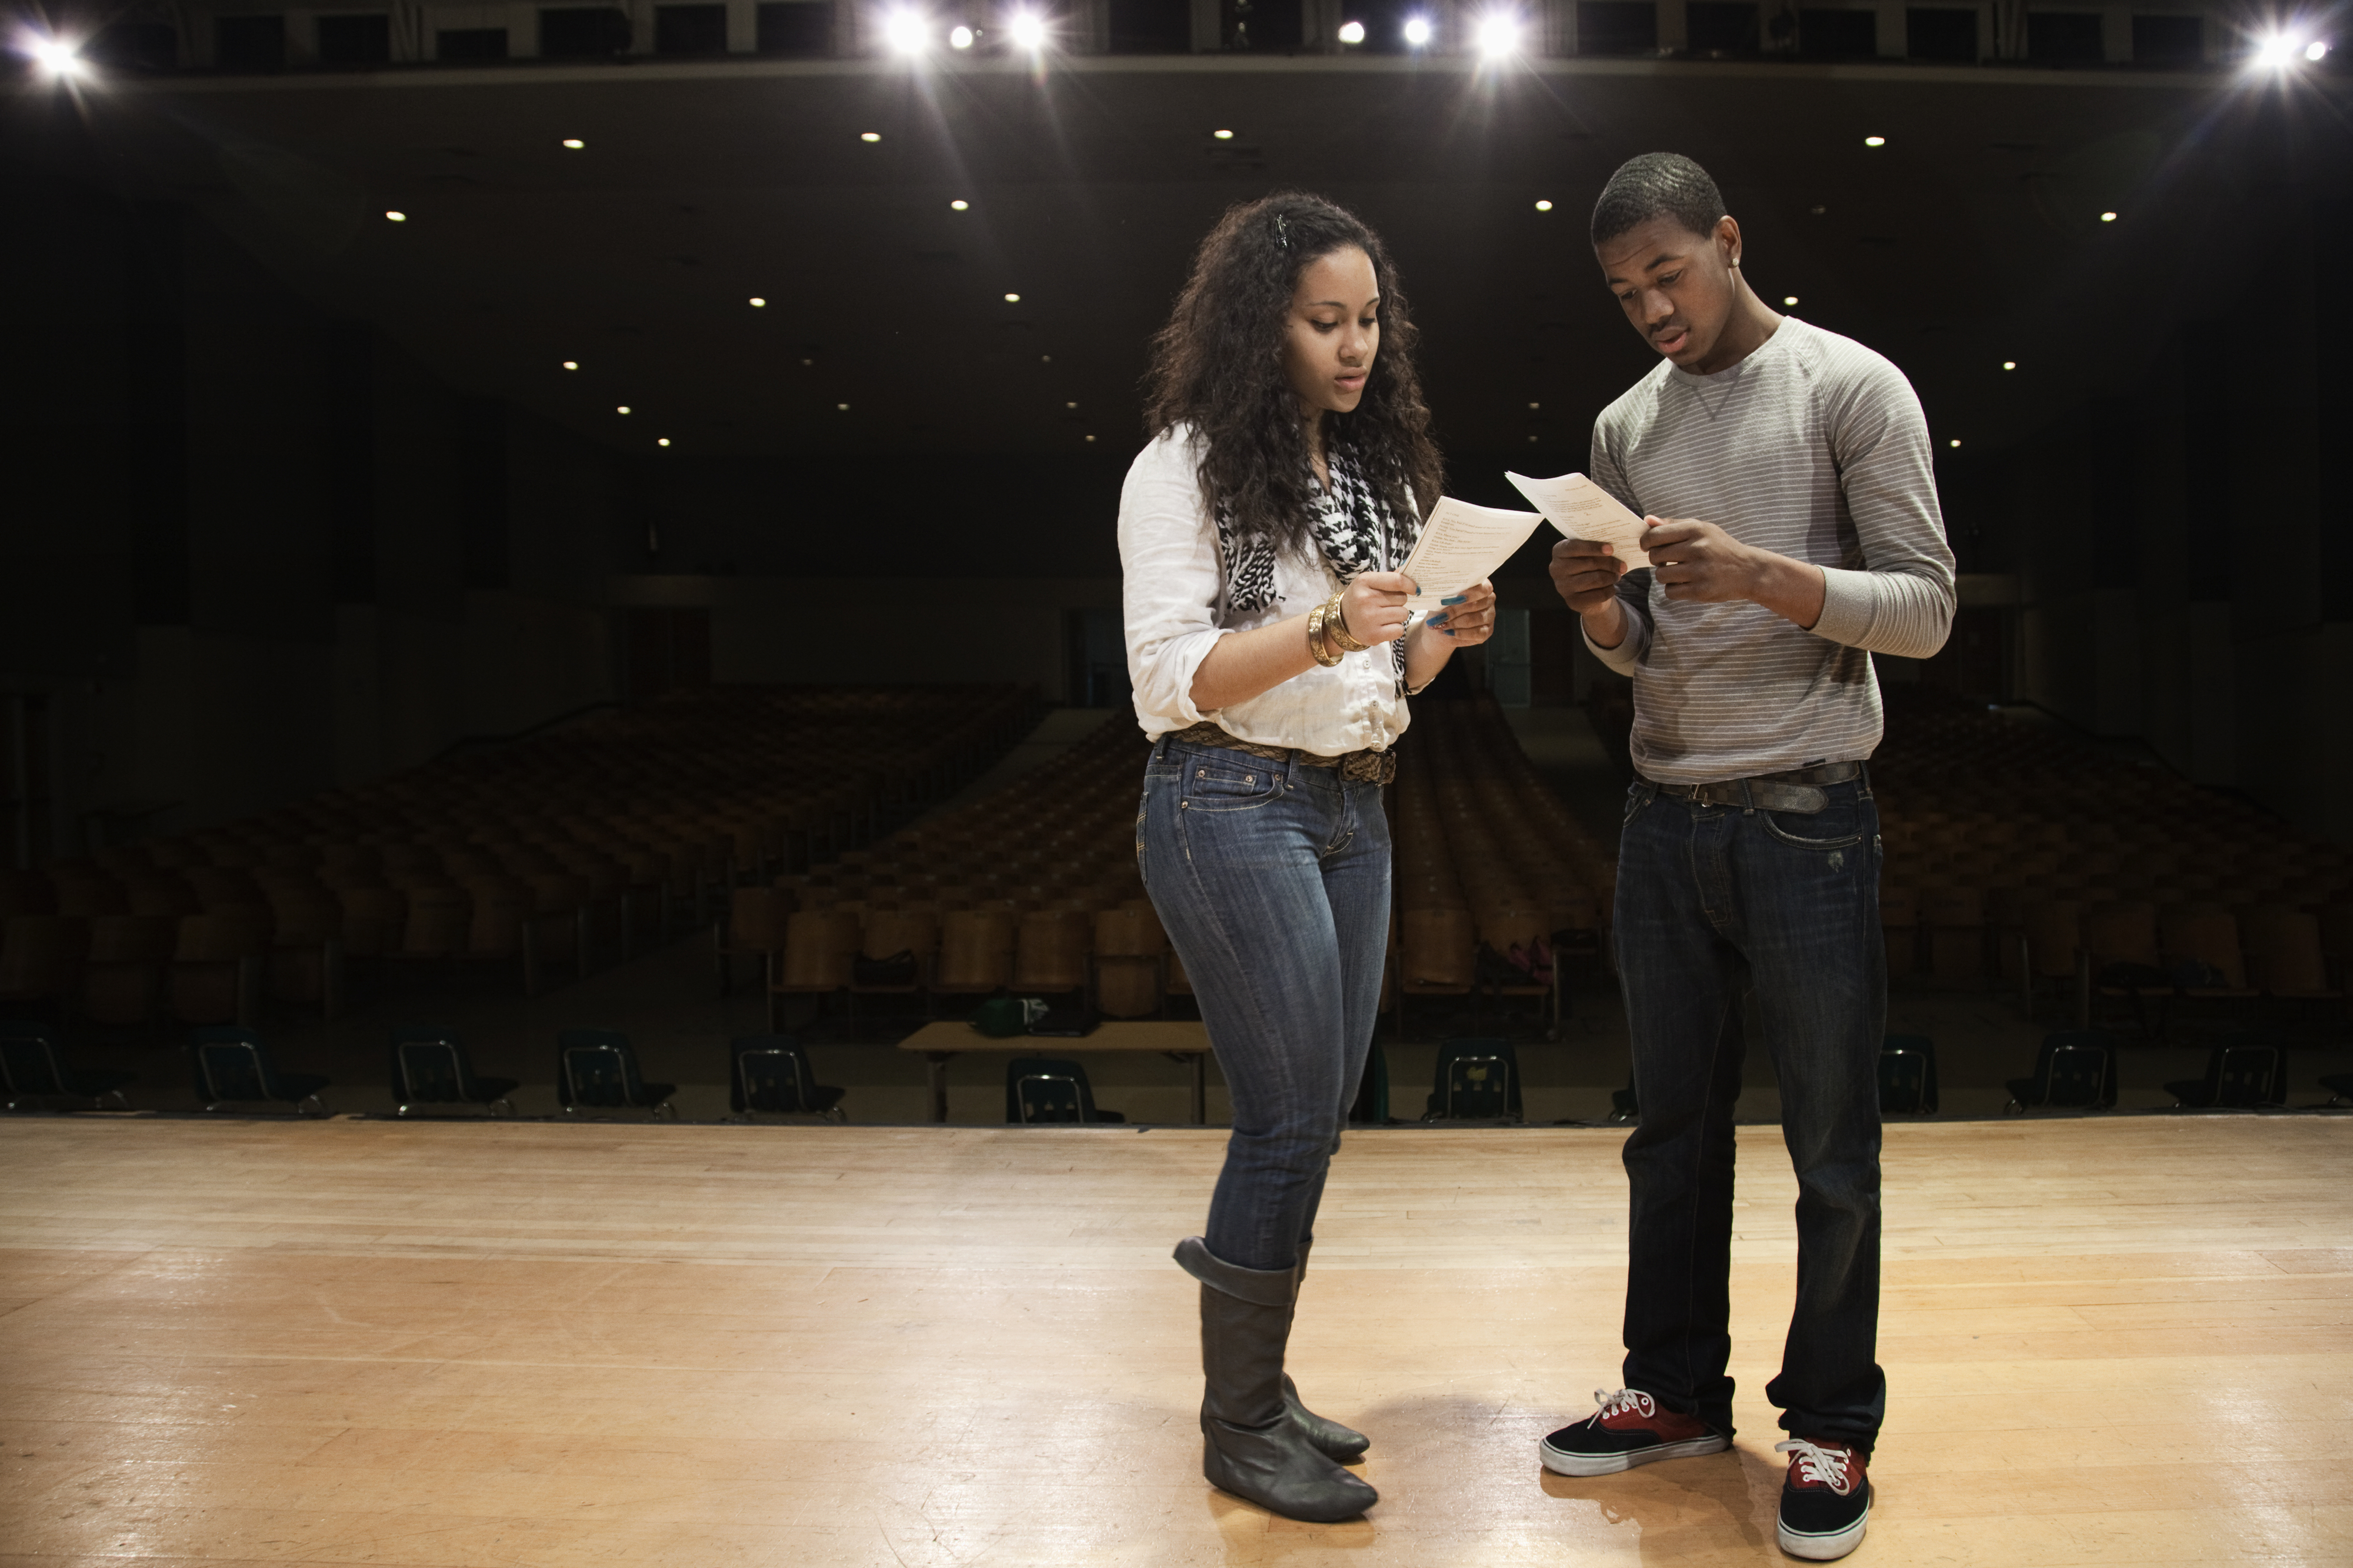 high school theater students reading a script on stage